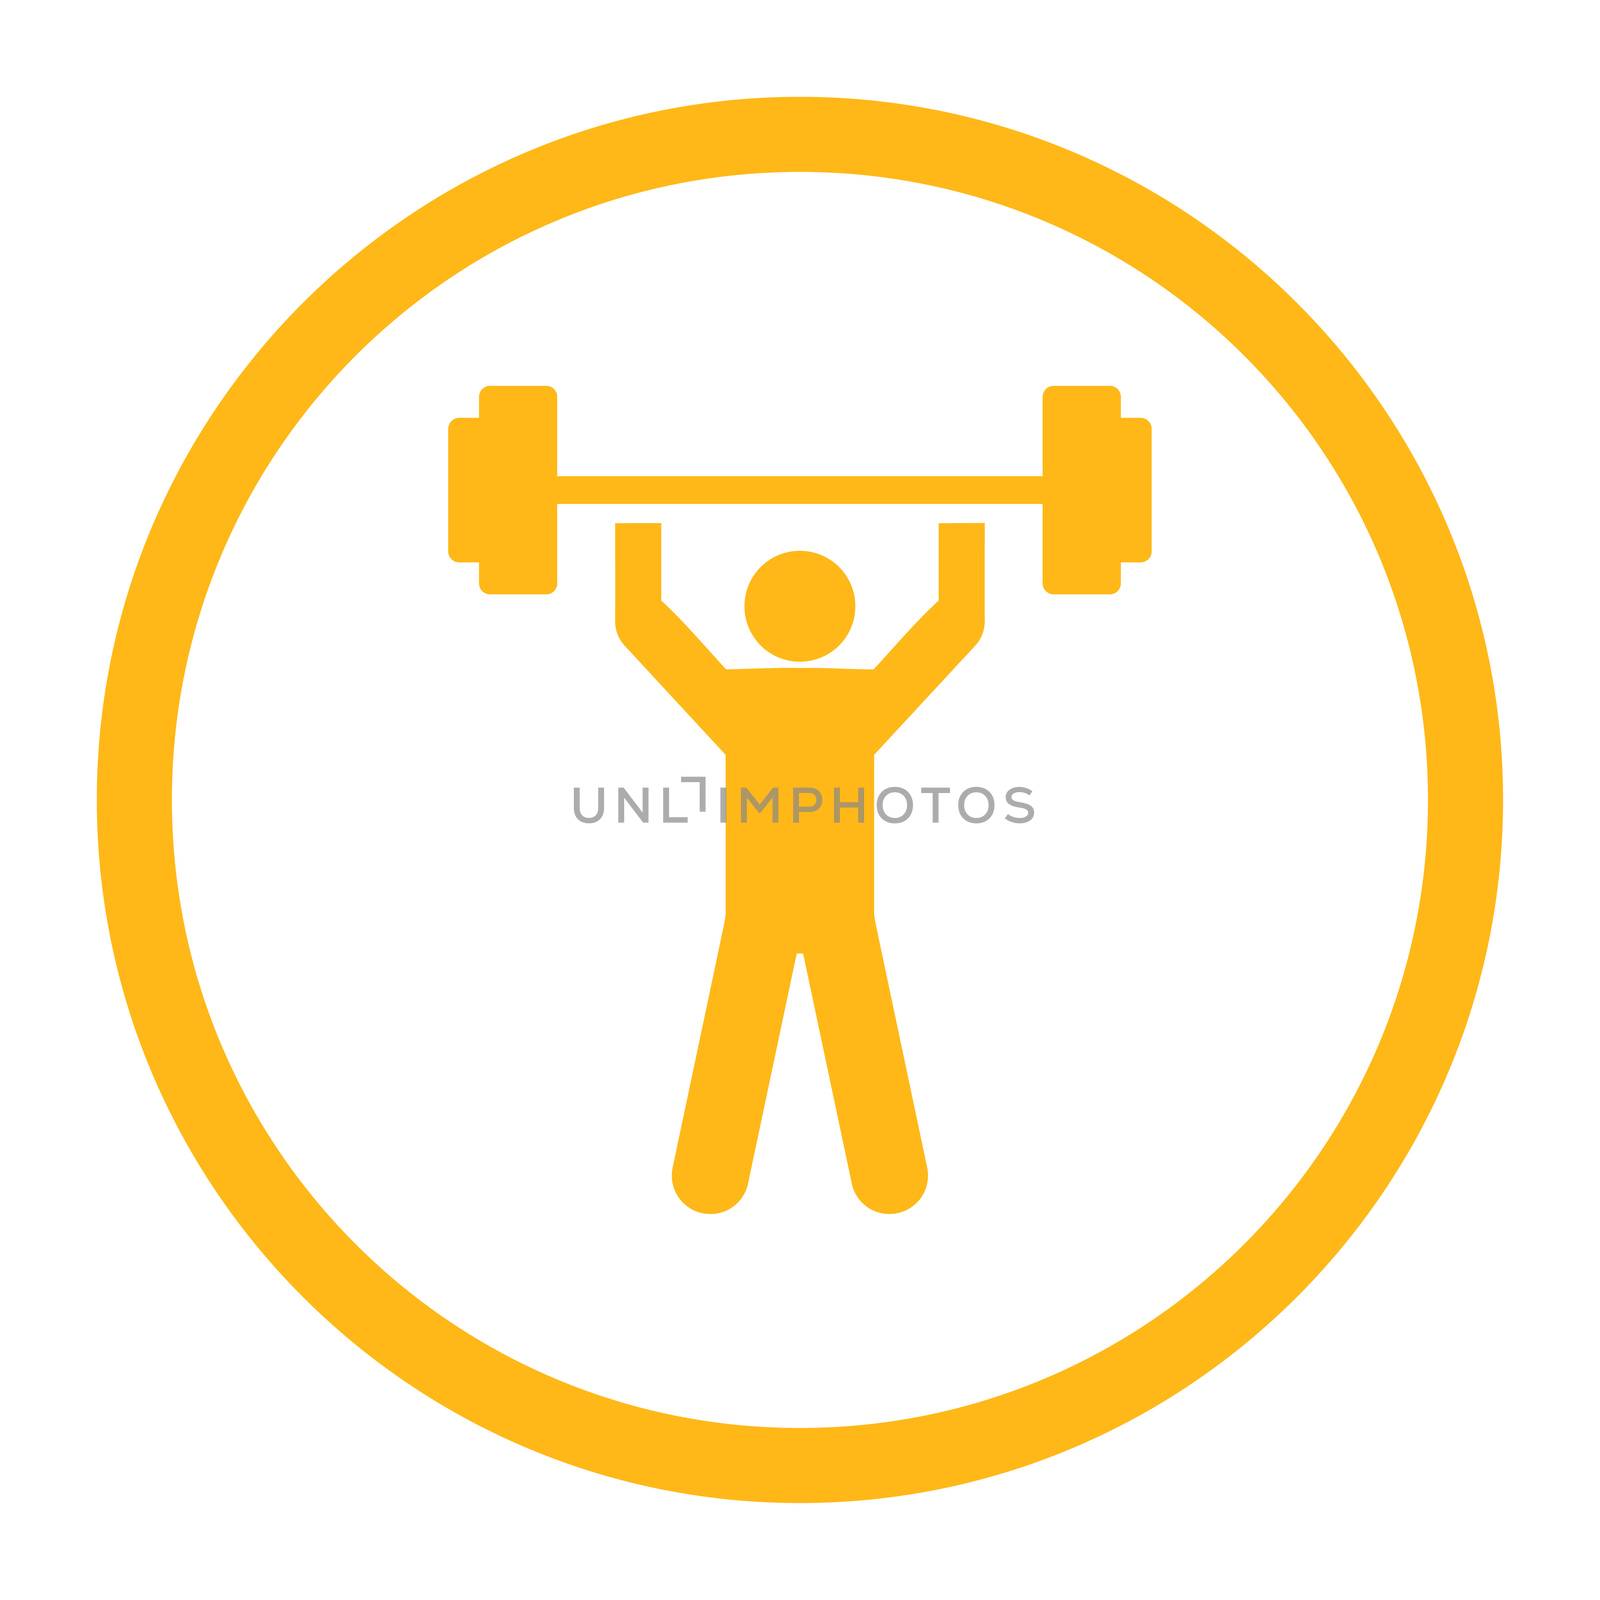 Power lifting glyph icon. This rounded flat symbol is drawn with yellow color on a white background.